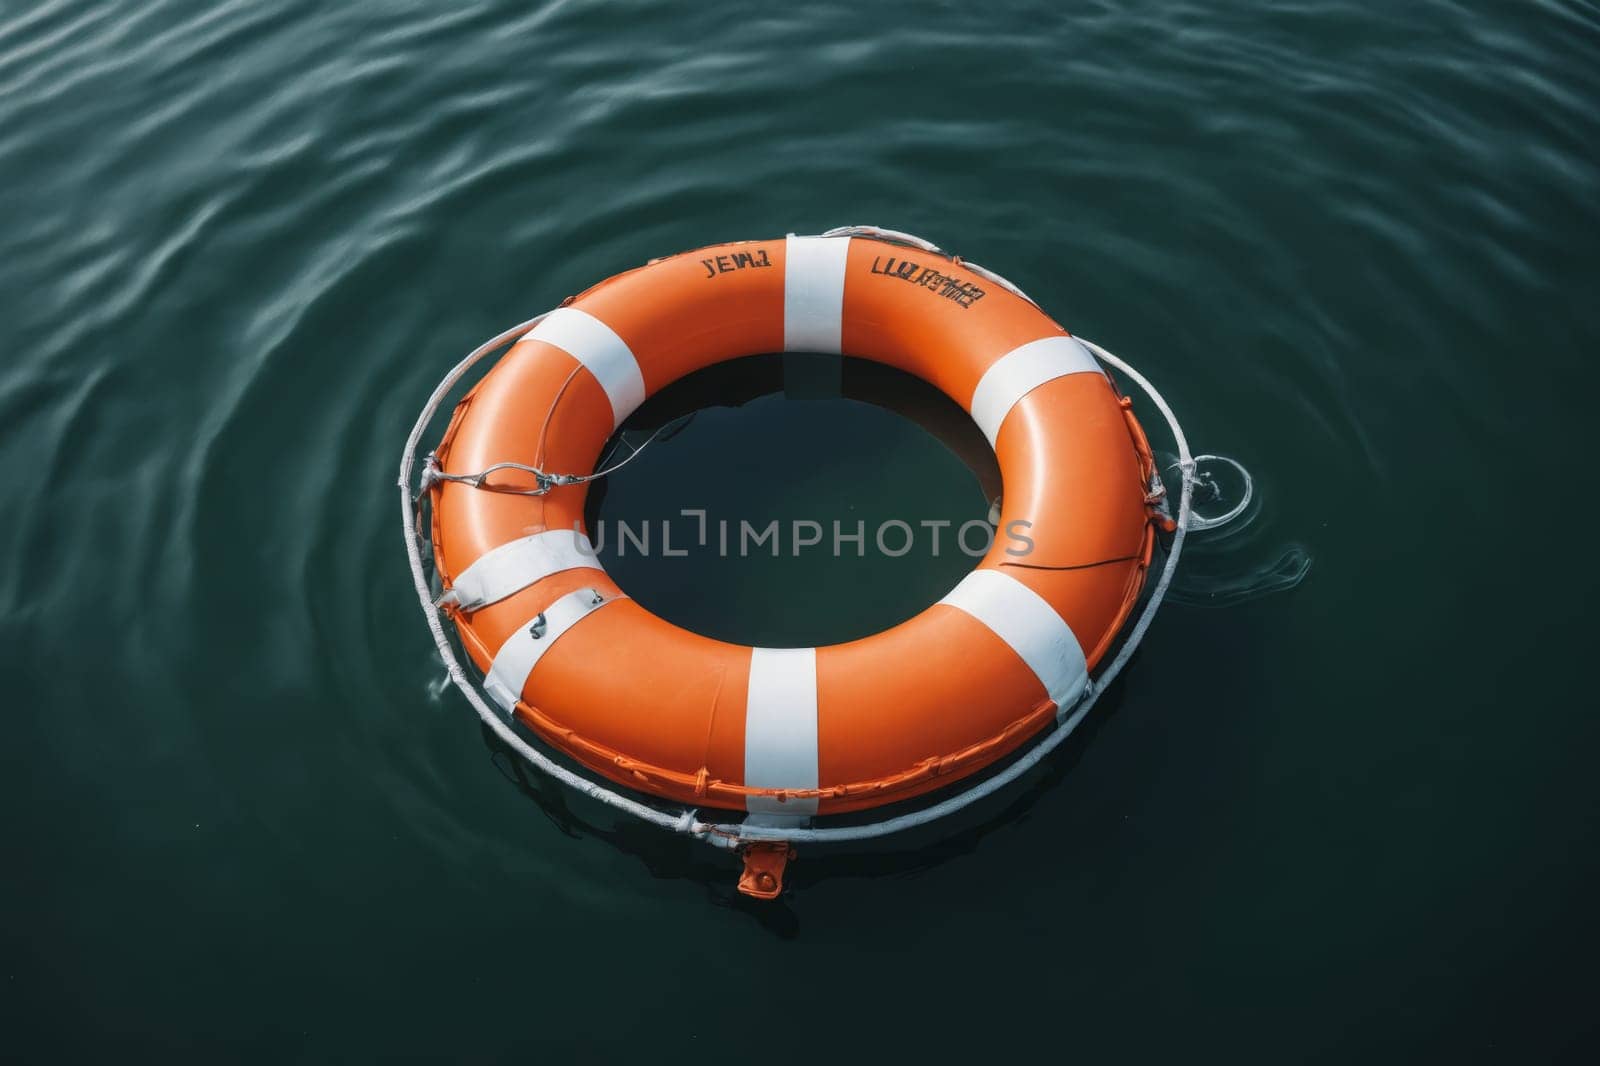 The vibrant hue of an orange lifesaver stands out in the somber tones of oceanic depths.